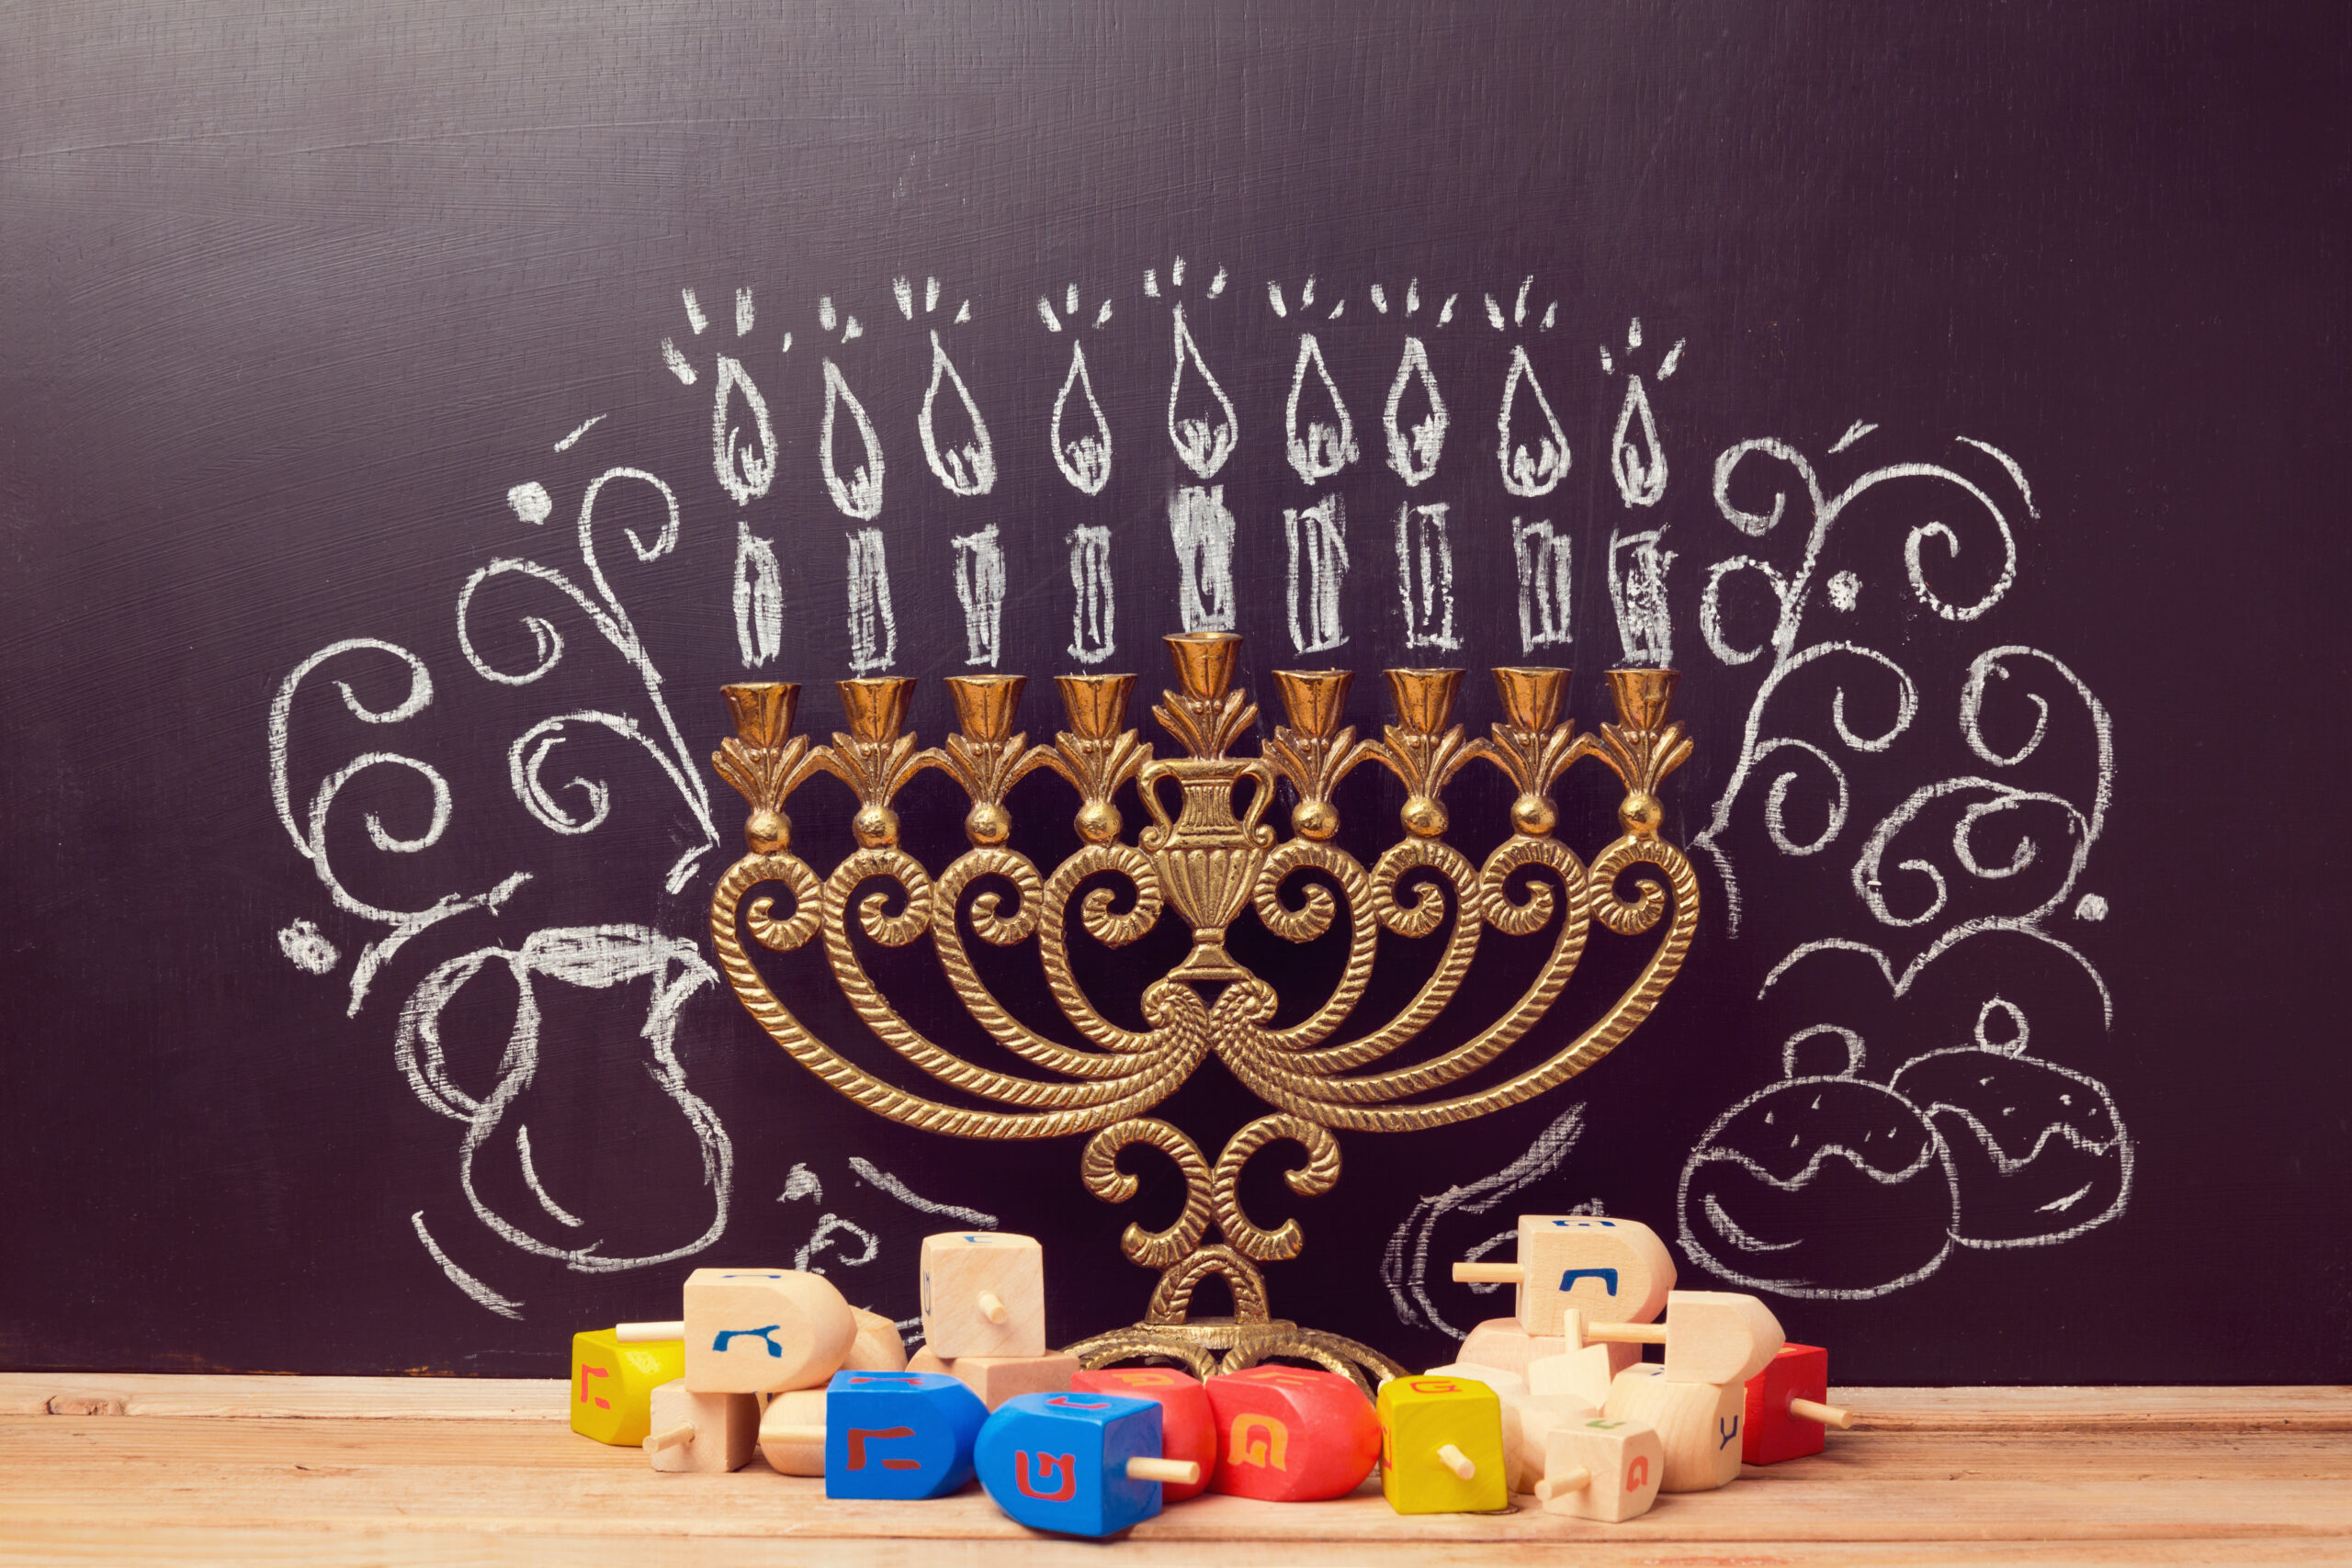 Creative Jewish holiday Hanukkah background with menorah and spinning tops over chalkboard with hand drawing